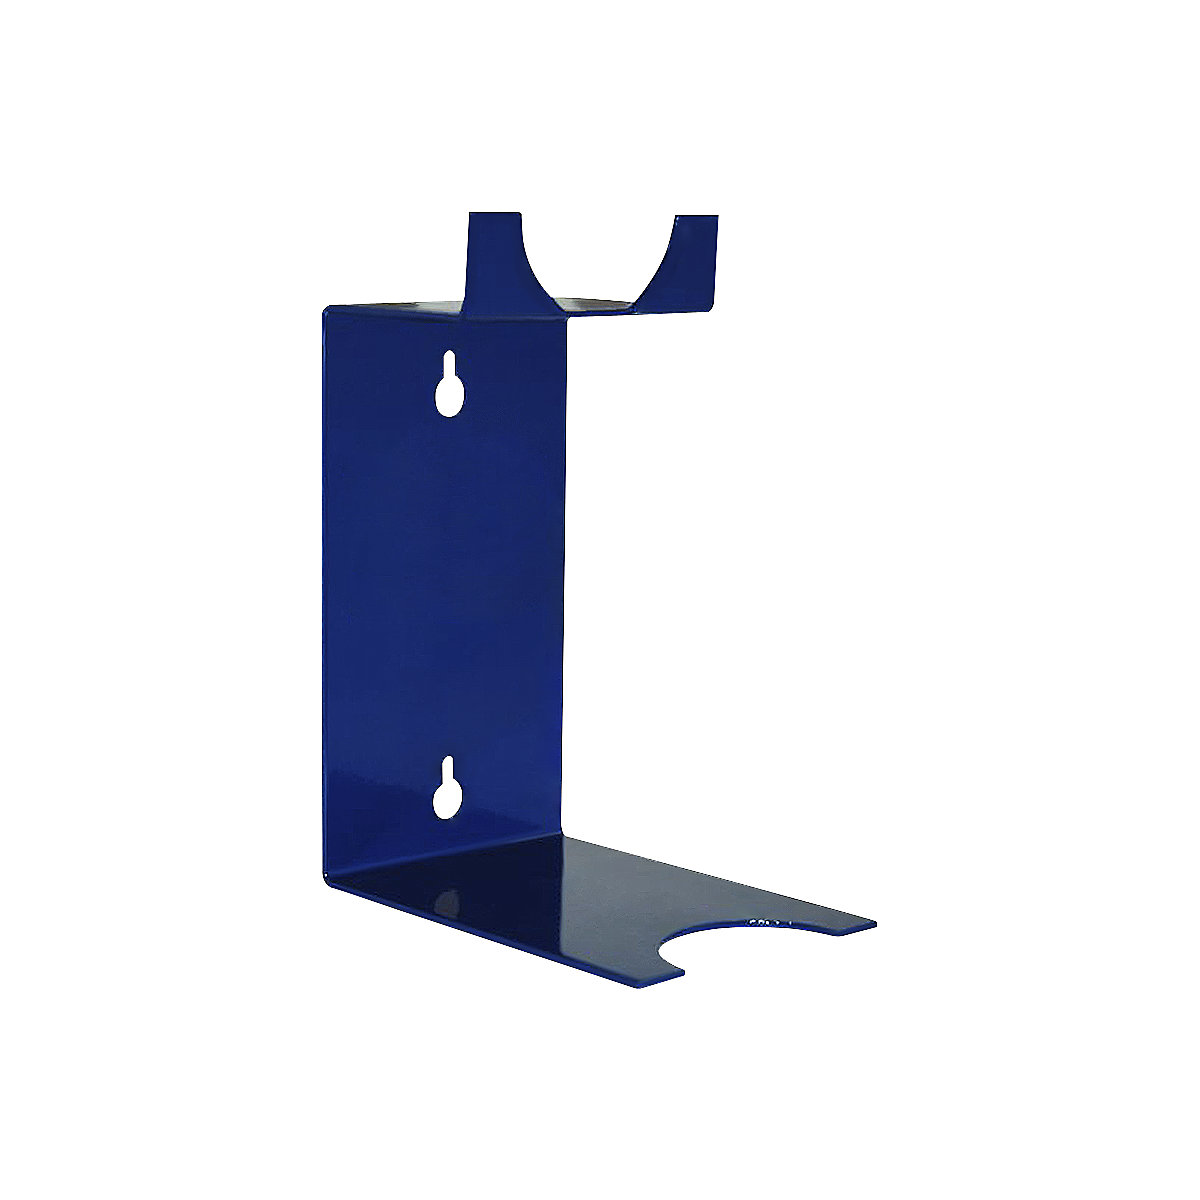 Wall suspension device – Jessberger